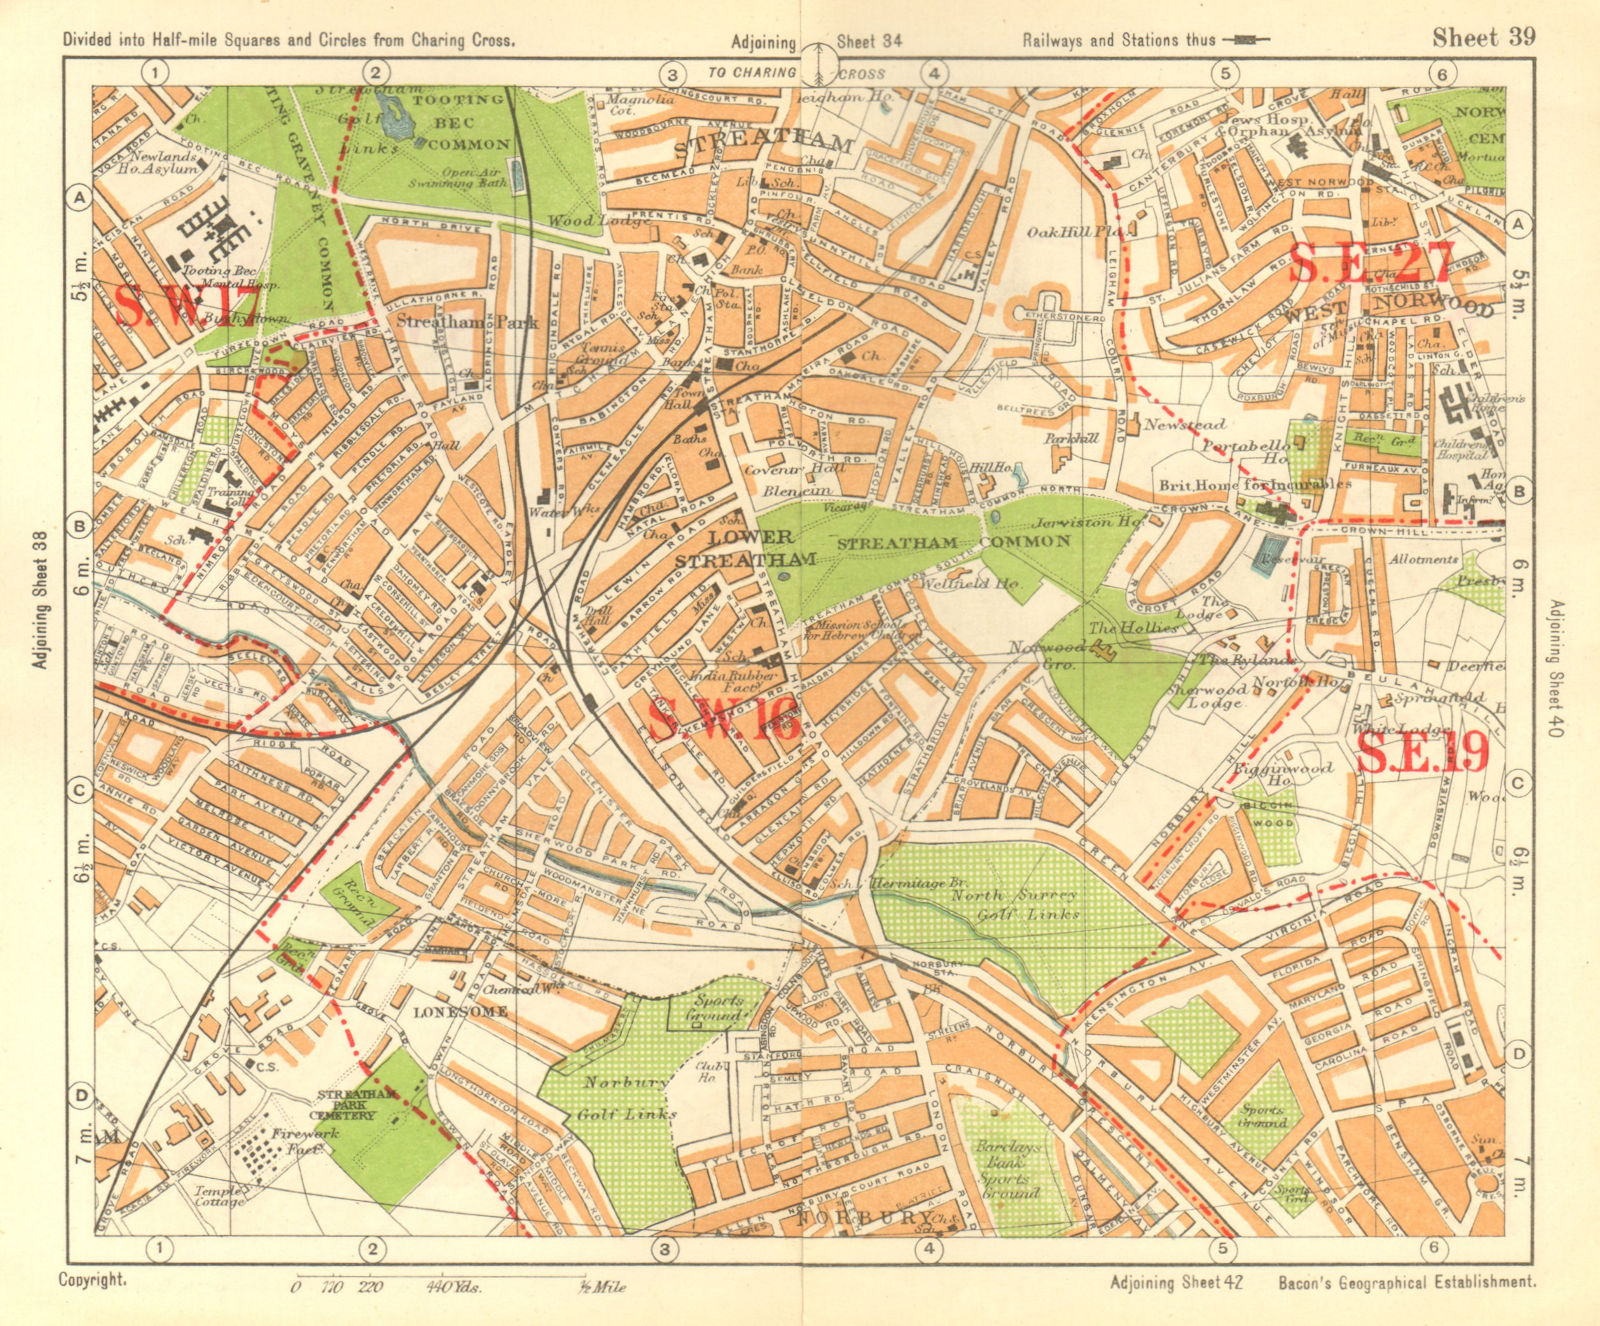 S LONDON. Streatham/Vale Norbury Tooting Bec West Norwood. BACON 1928 old map